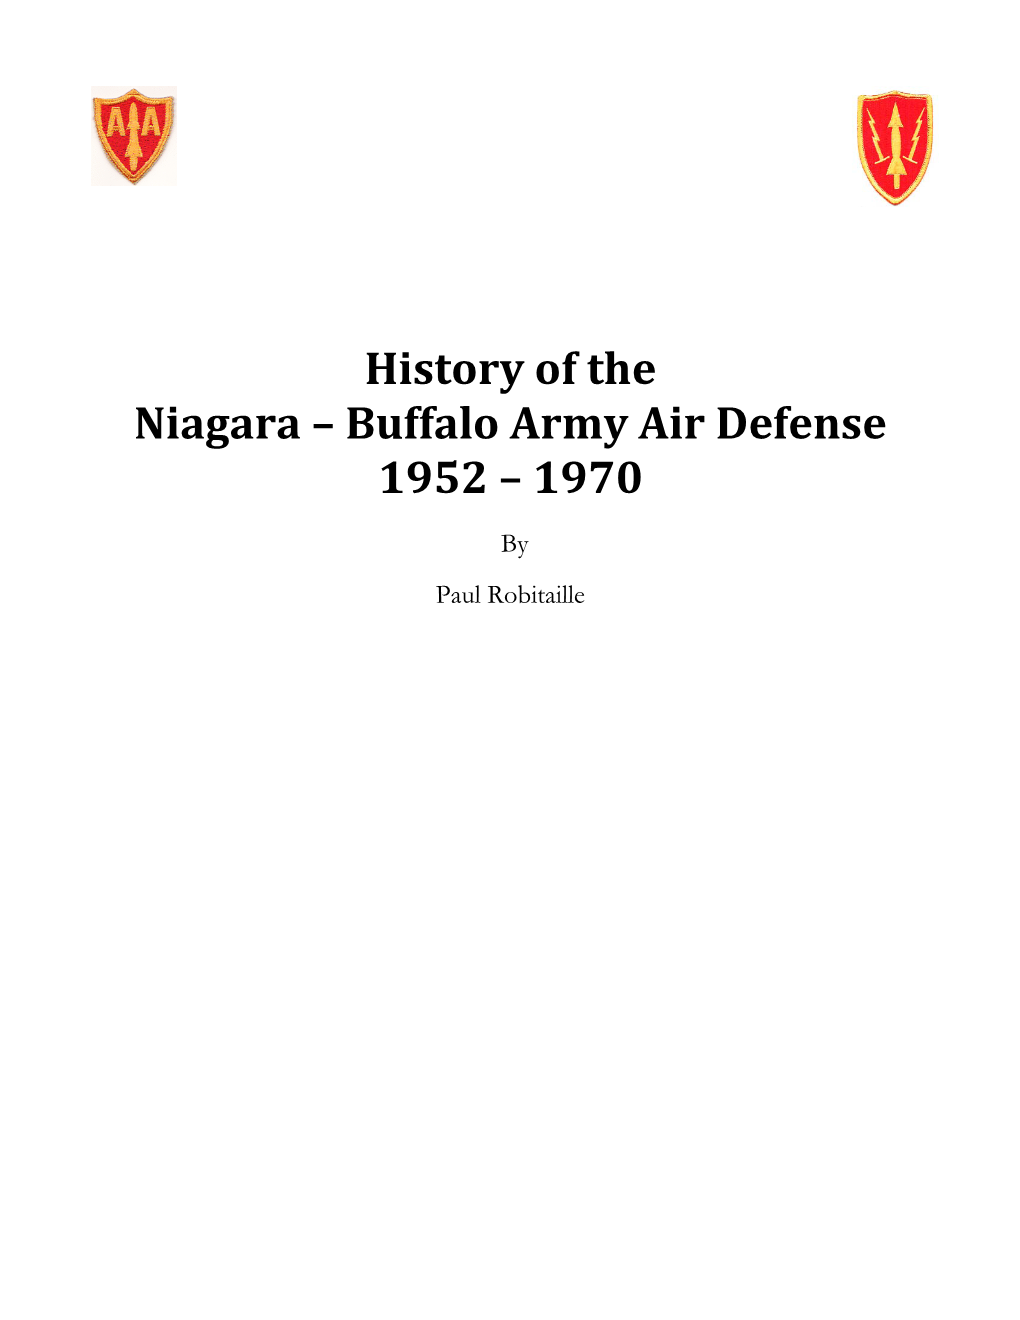 History of the Niagara – Buffalo Army Air Defense 1952 – 1970 by Paul Robitaille